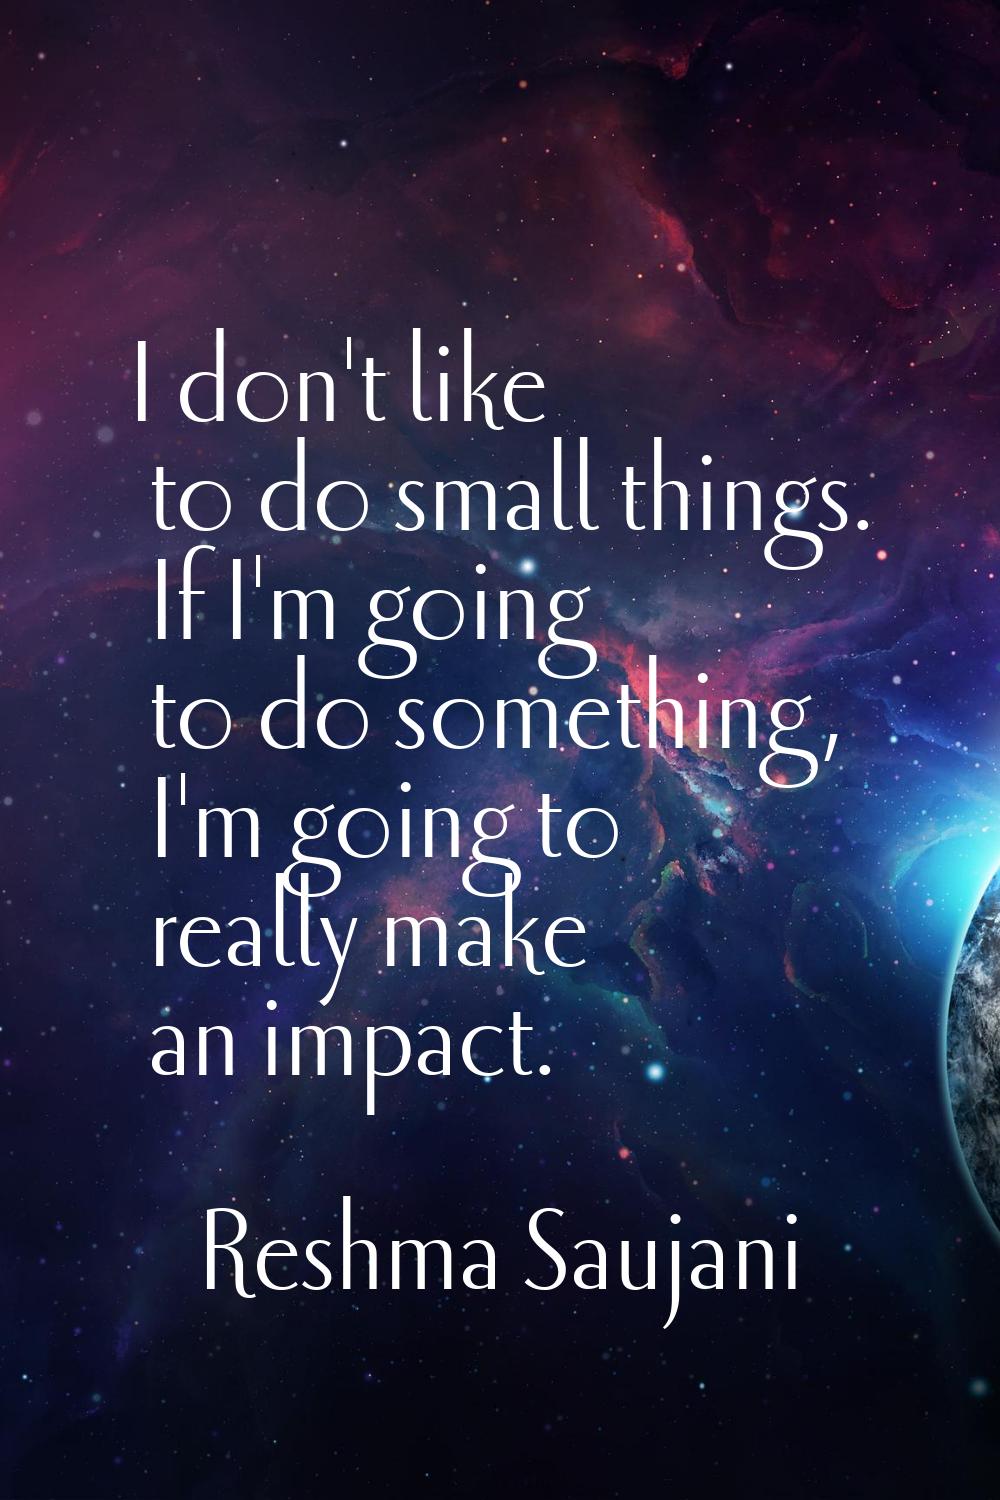 I don't like to do small things. If I'm going to do something, I'm going to really make an impact.